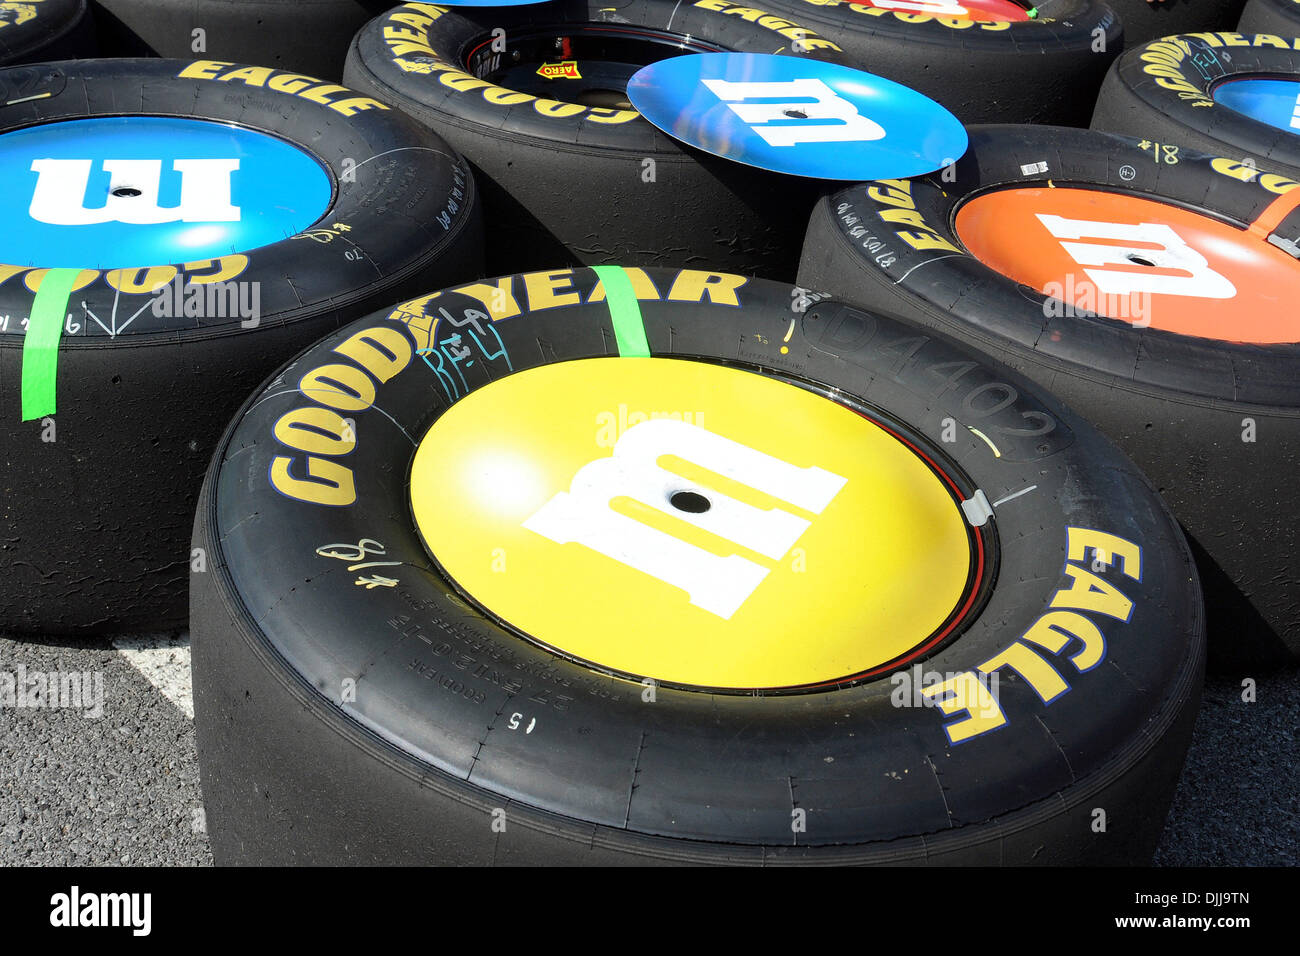 Aug. 08, 2010 - Watkins Glen, New York, United States of America - August 8, 2010: Goodyear tires sit in the pit area for KYLE BUSCH after being pre-paired for use in the Heluva Good! Sour Cream Dips at the Glen Sprint Cup race at Watkins Glen International, Watkins Glen, NY..Mandatory Credit: Michael Johnson / Southcreek Global (Credit Image: Â© Southcreek Global/ZUMApress.com) Stock Photo